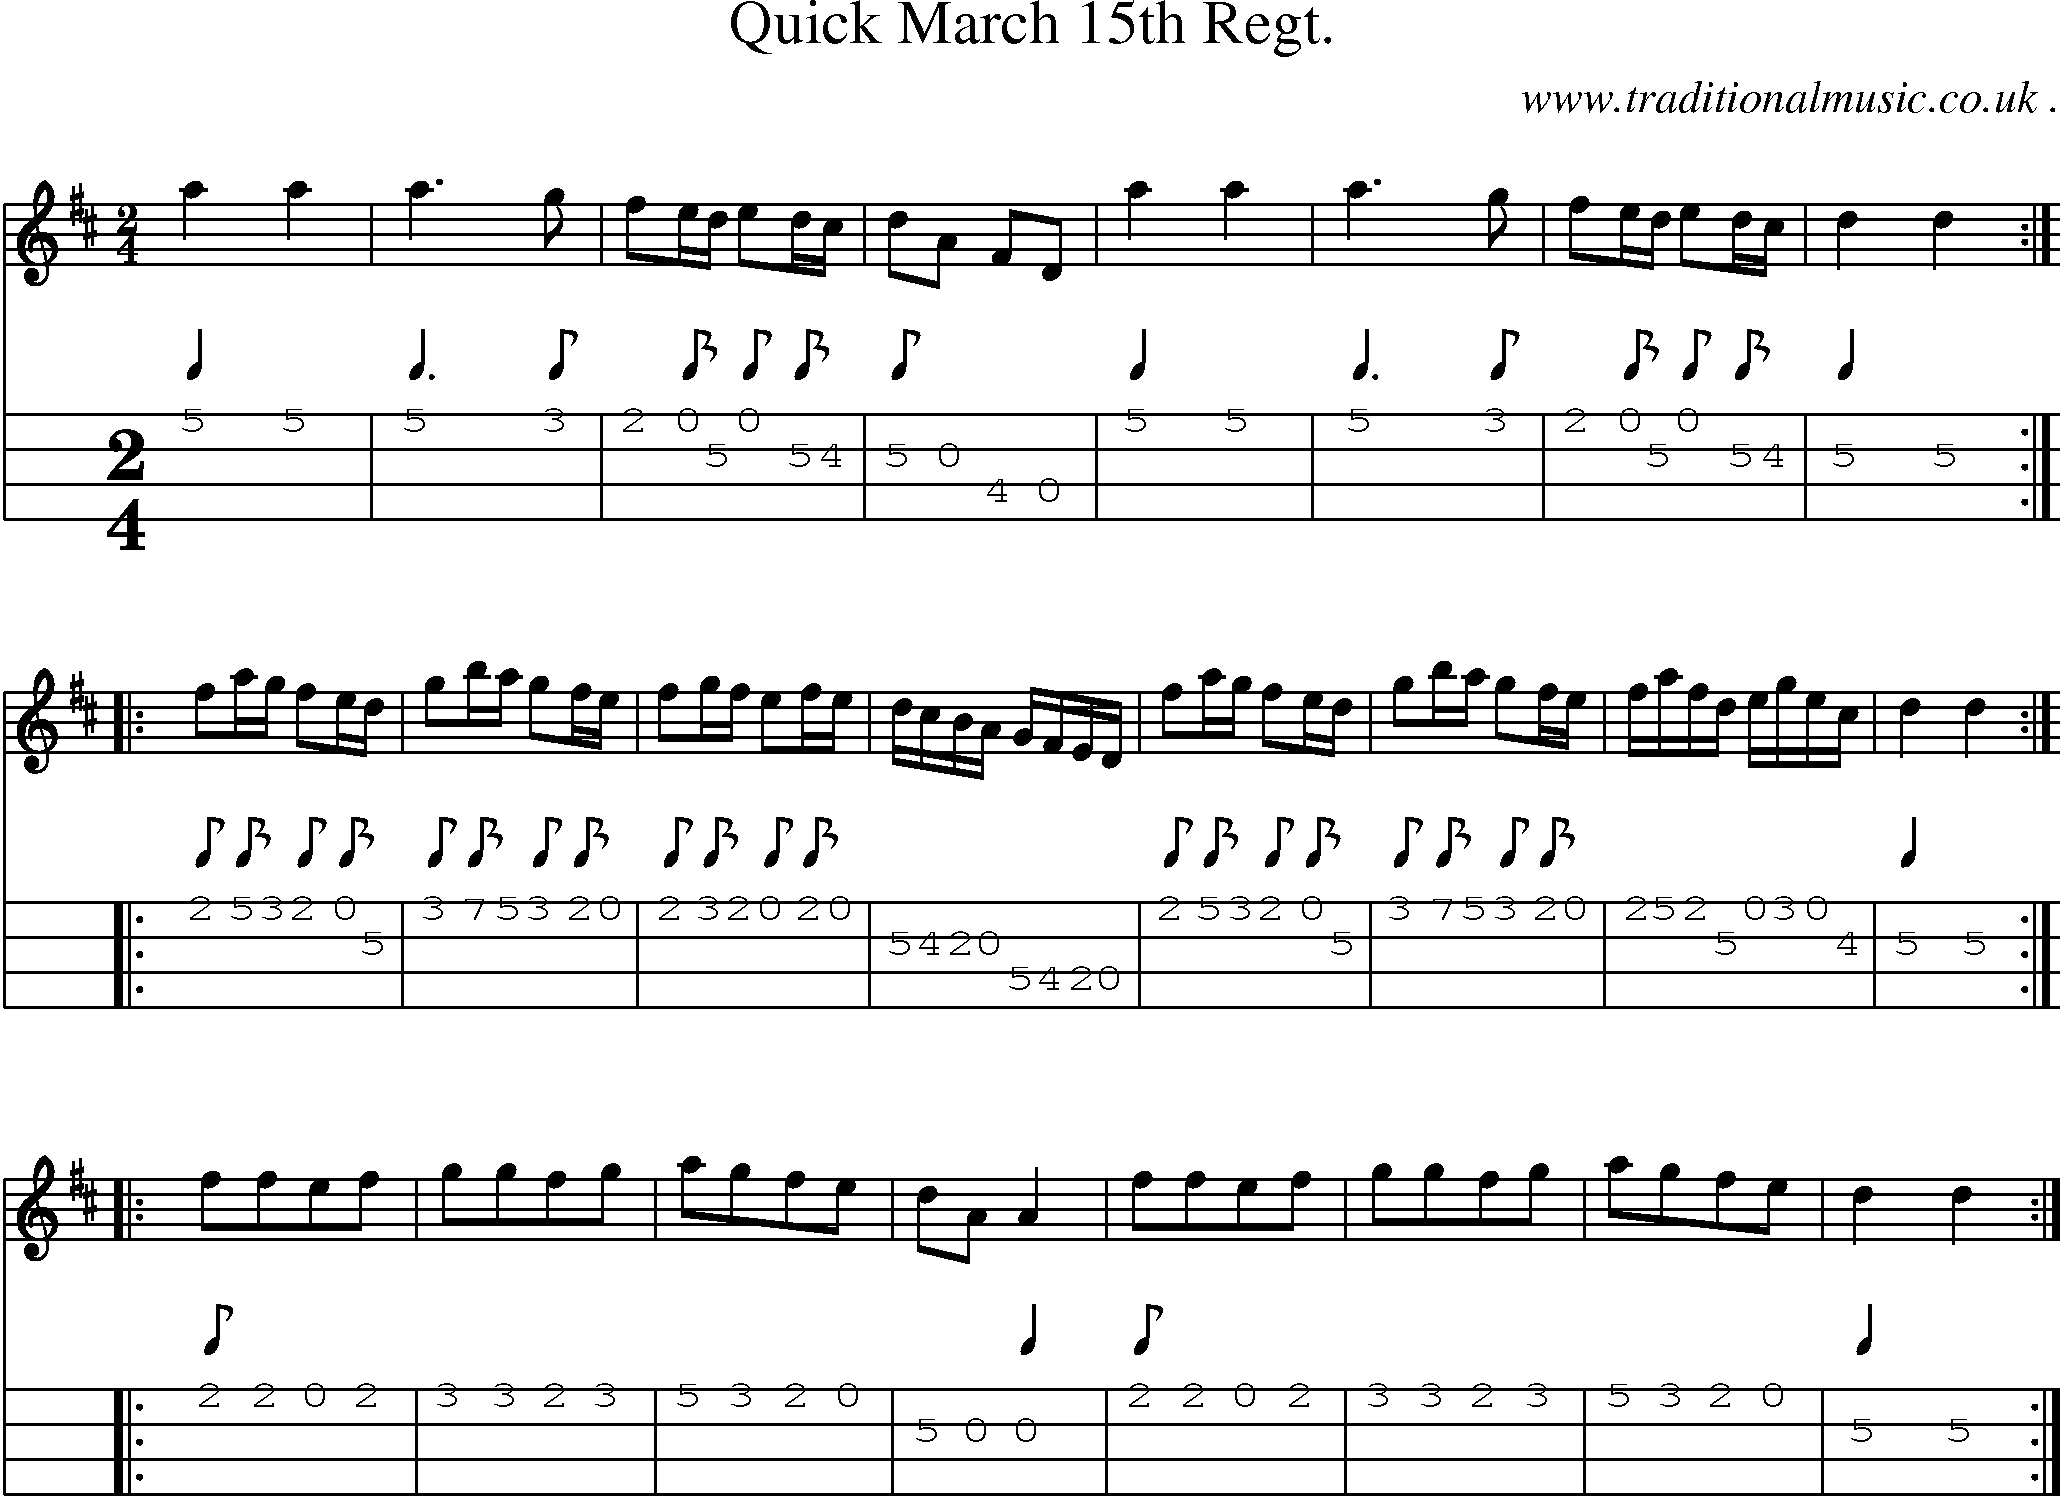 Sheet-Music and Mandolin Tabs for Quick March 15th Regt